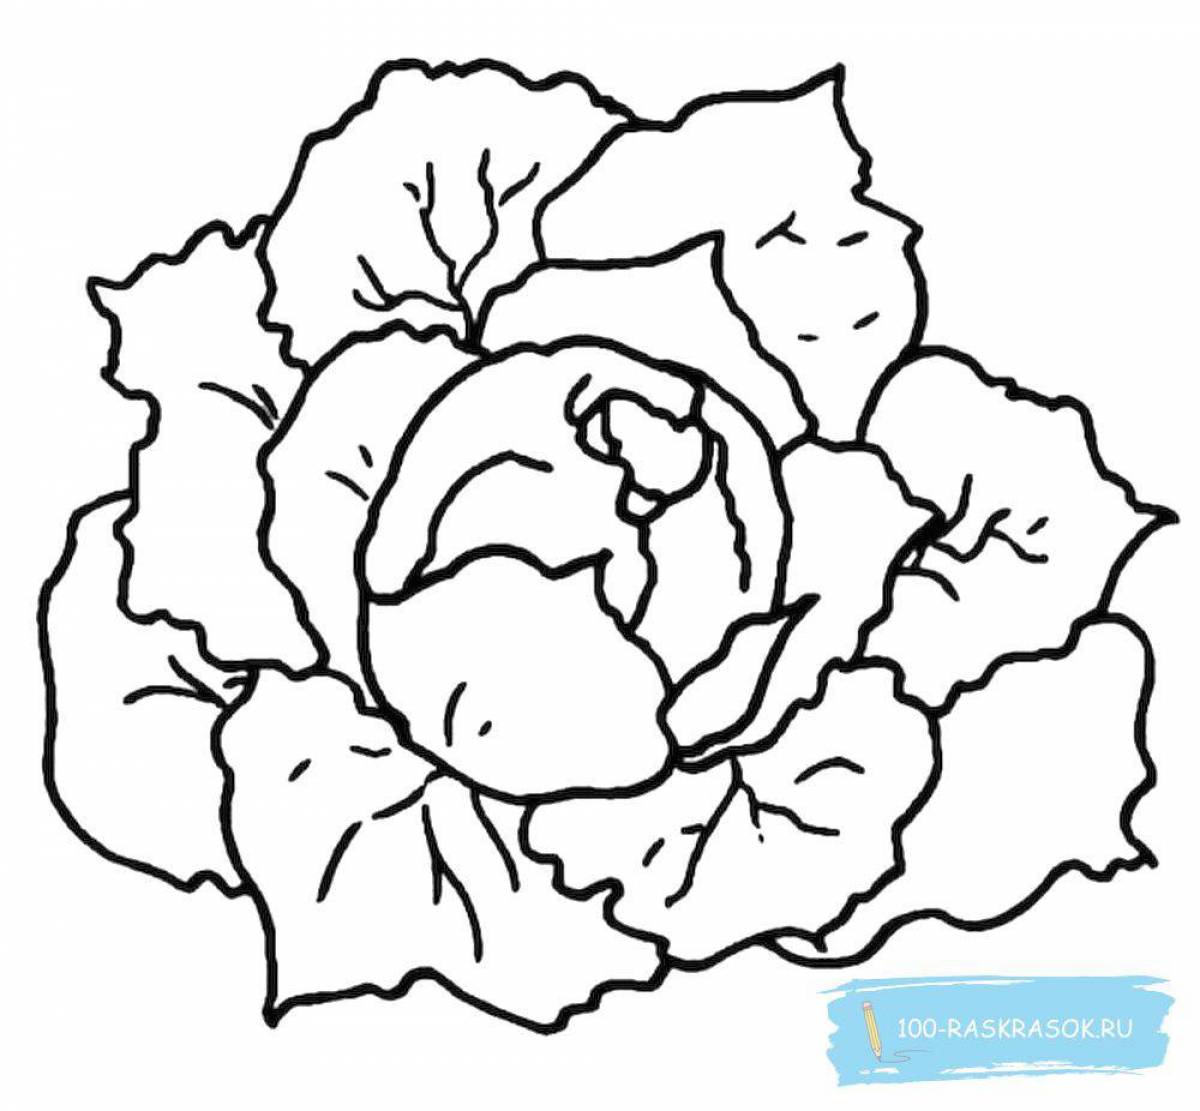 Fun coloring cabbage for kids